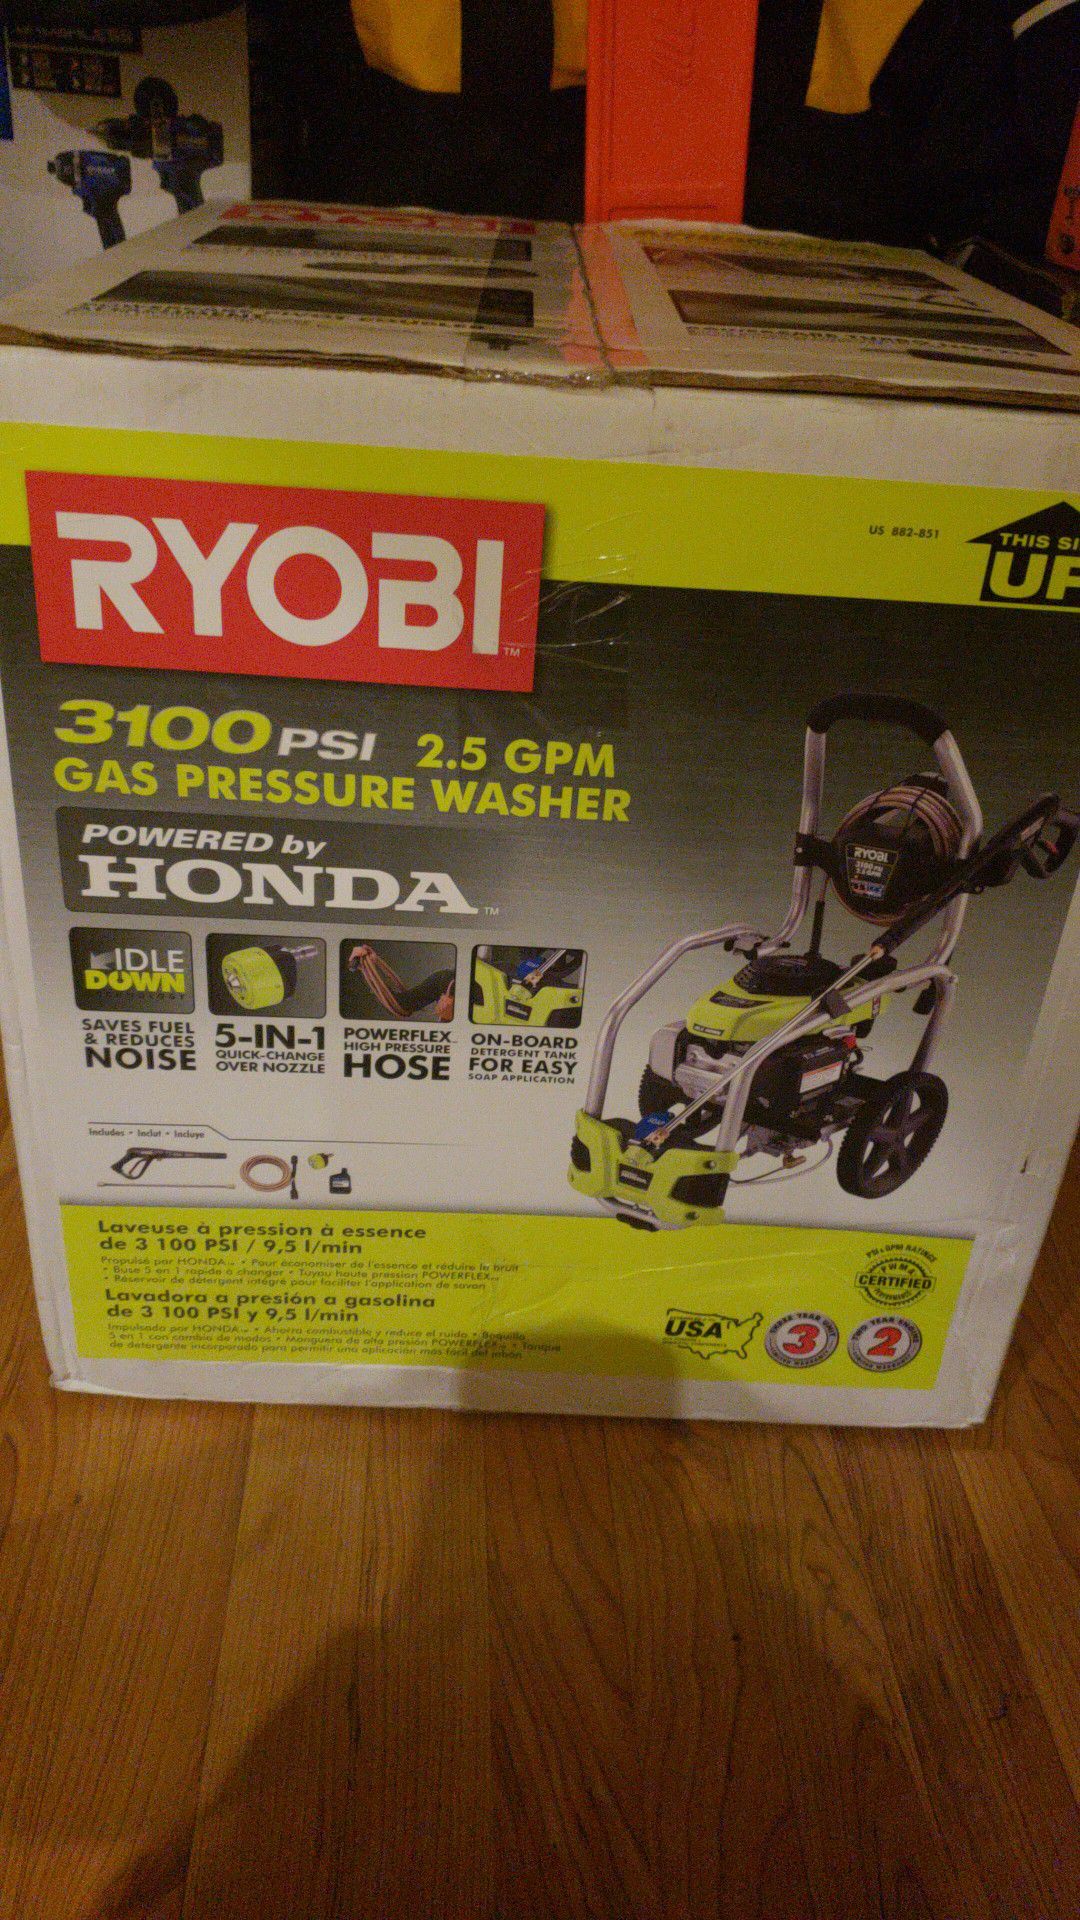 3100 psi 2.5 GPM GAS PRESSURE WASHER POWERE BY HONDA